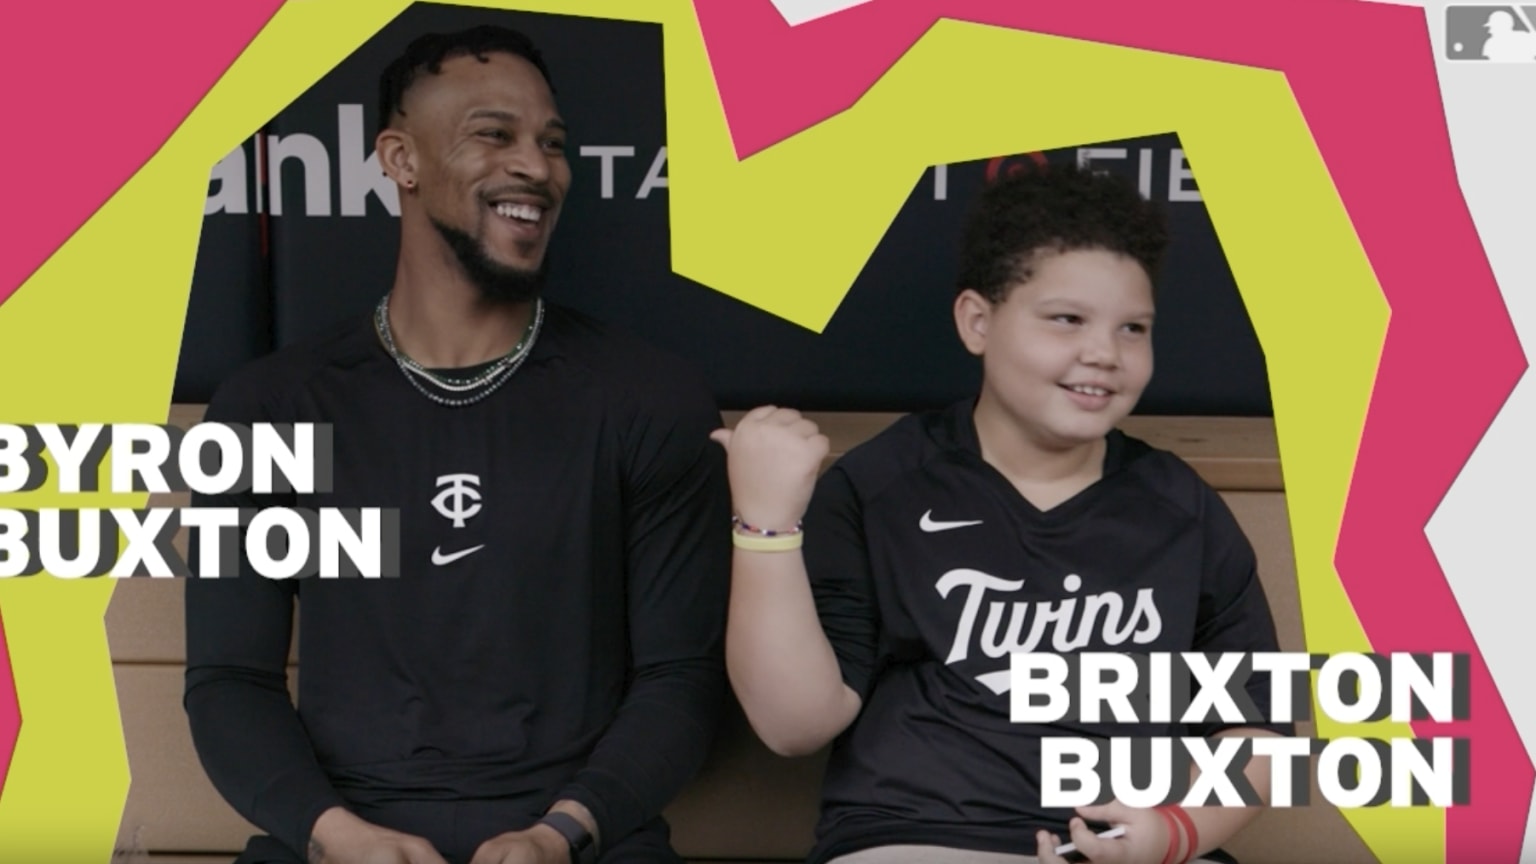 Designed art of Byron Buxton sitting in a dugout smiling alongside his son Brixton